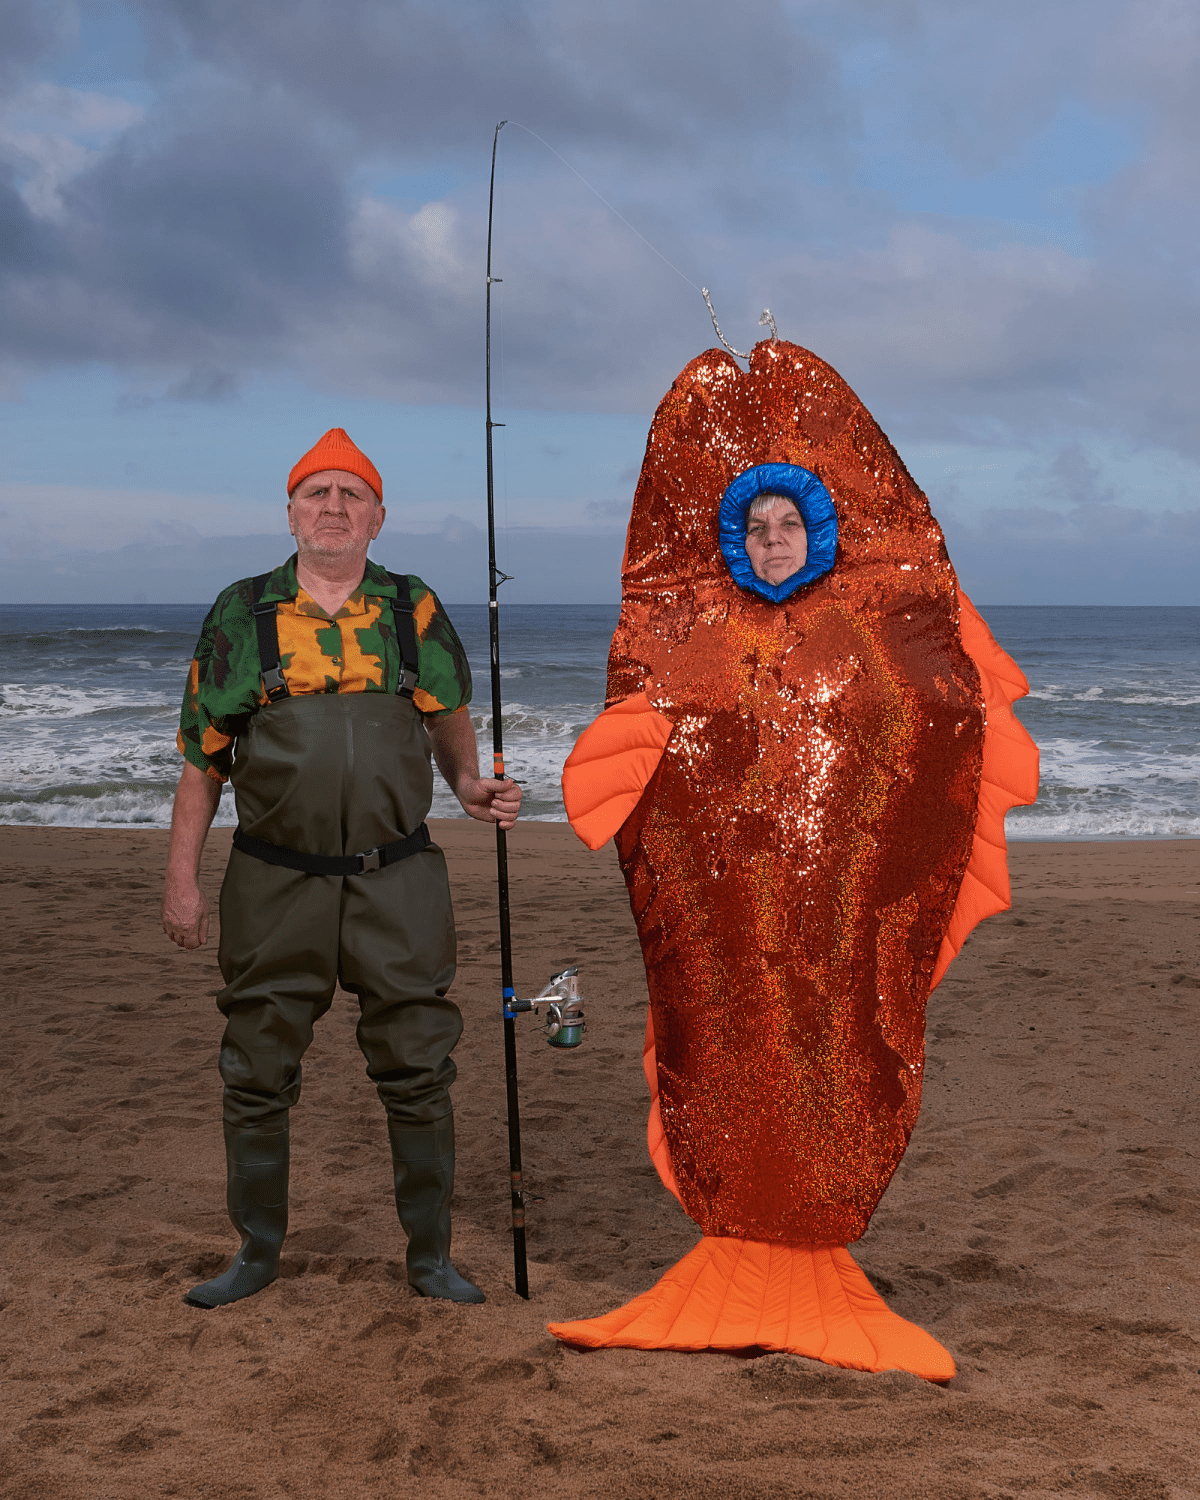 Couple dressed up as a fishman and goldfish on a beach in Portugal